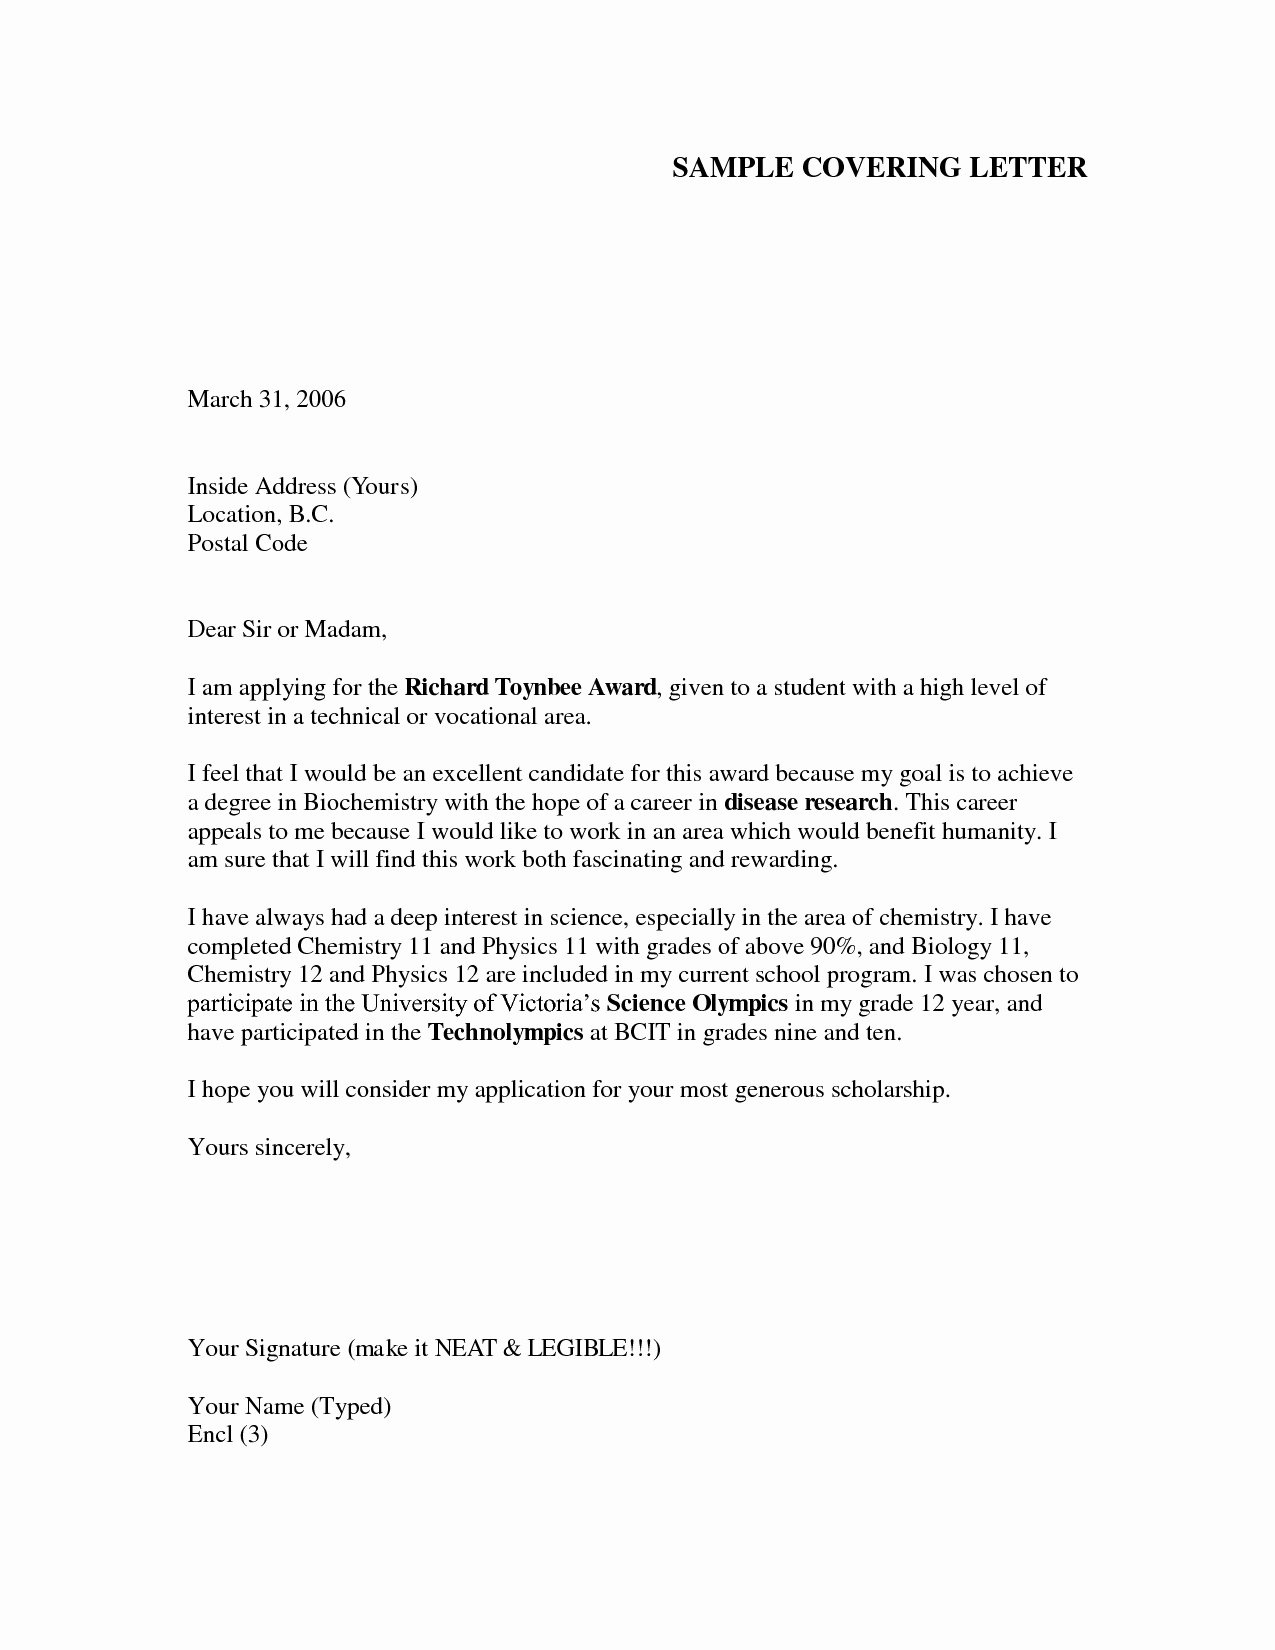 Letter Of Application Examples Unique Cover Letter Example for Job Application Cover Letter